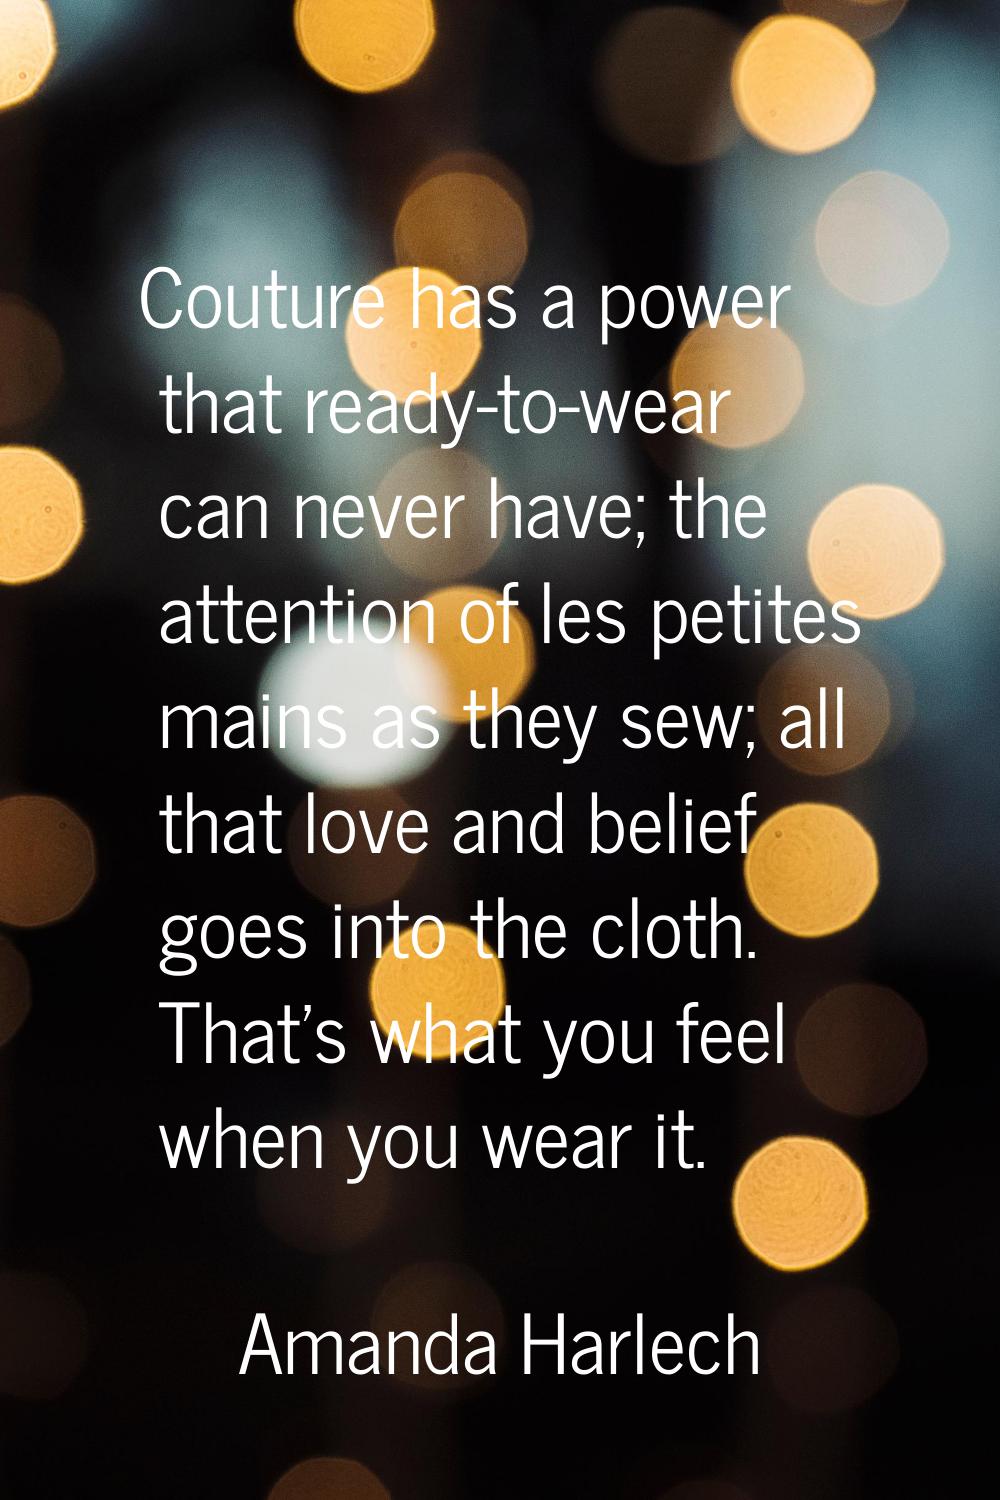 Couture has a power that ready-to-wear can never have; the attention of les petites mains as they s